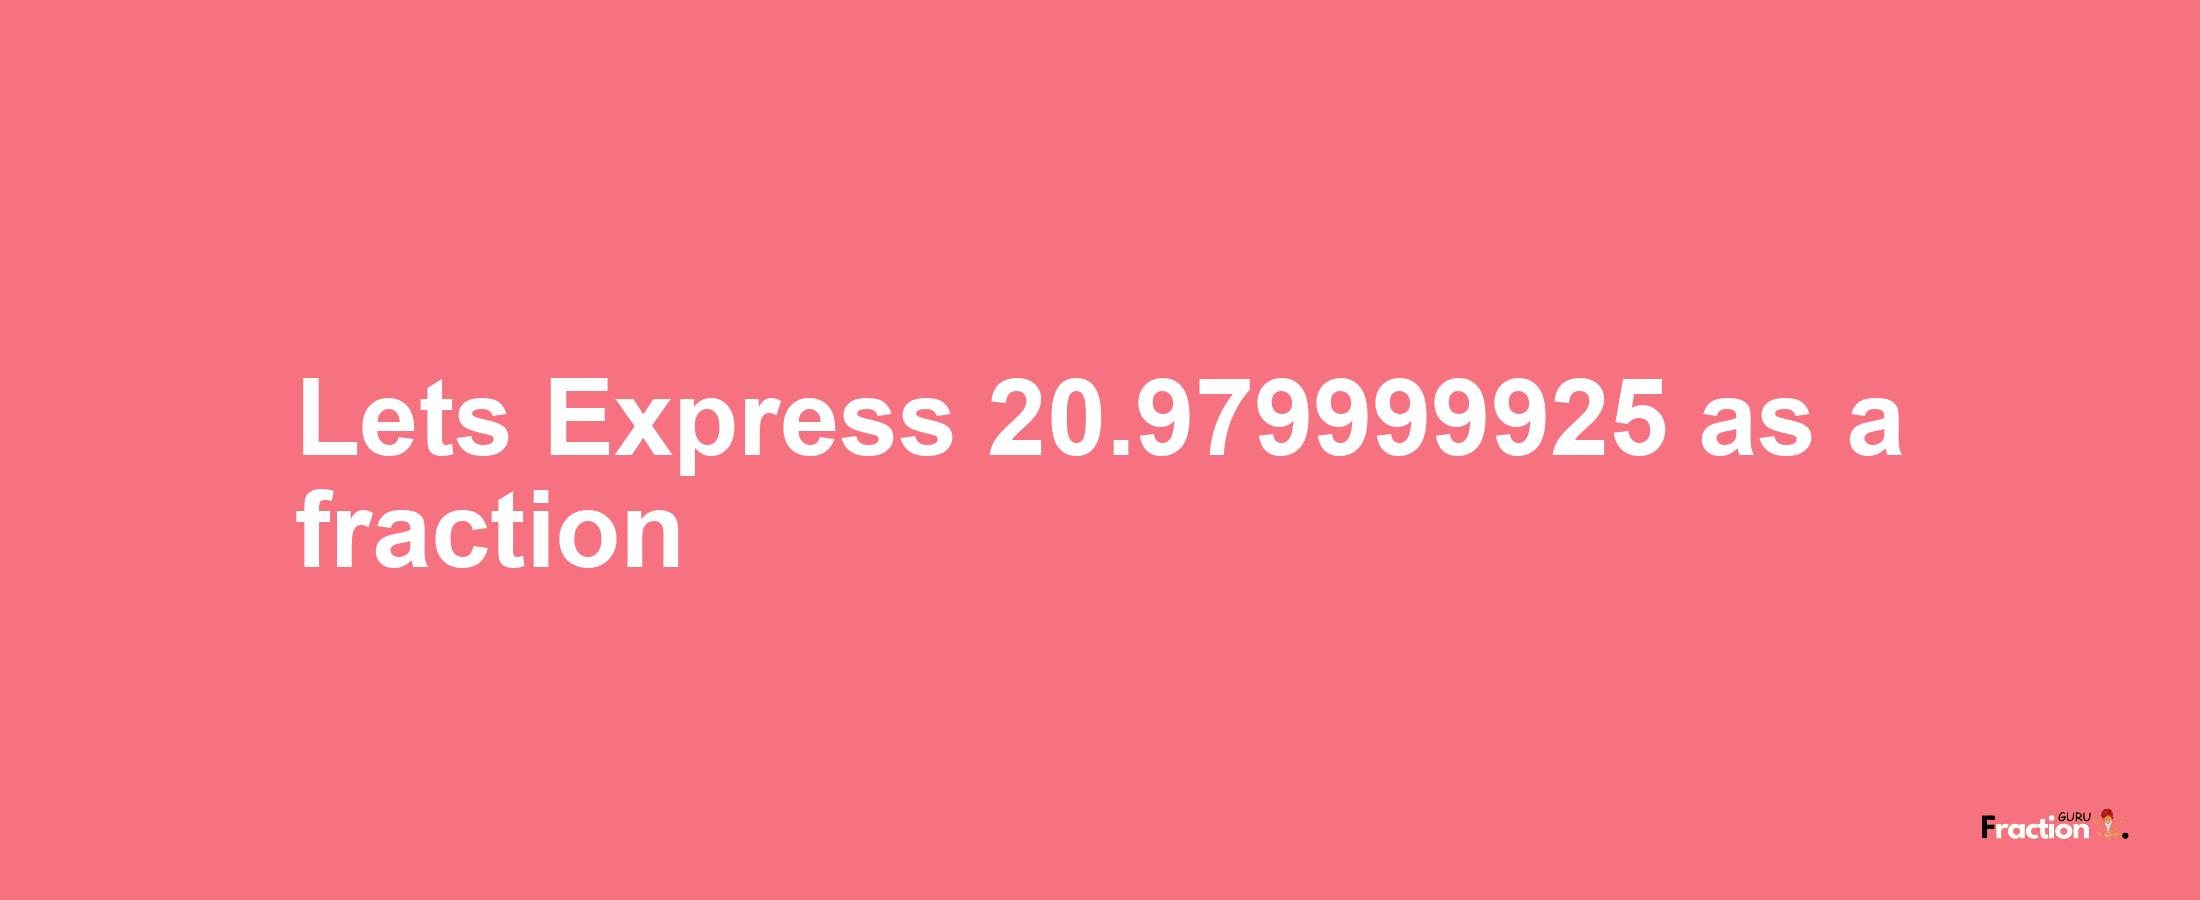 Lets Express 20.979999925 as afraction